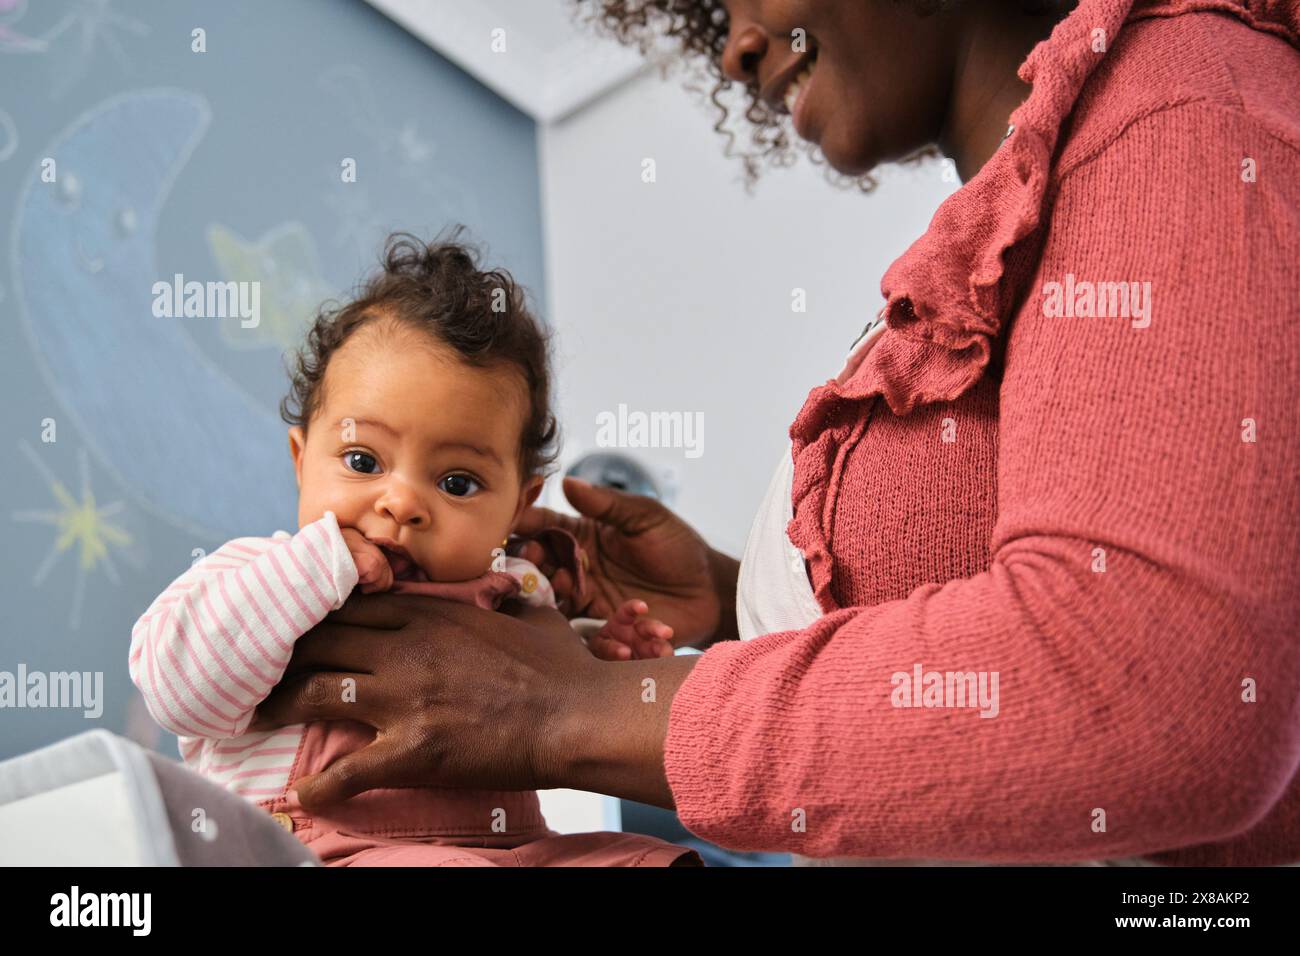 African mother is holding a baby girl while changing her clothes. Stock Photo